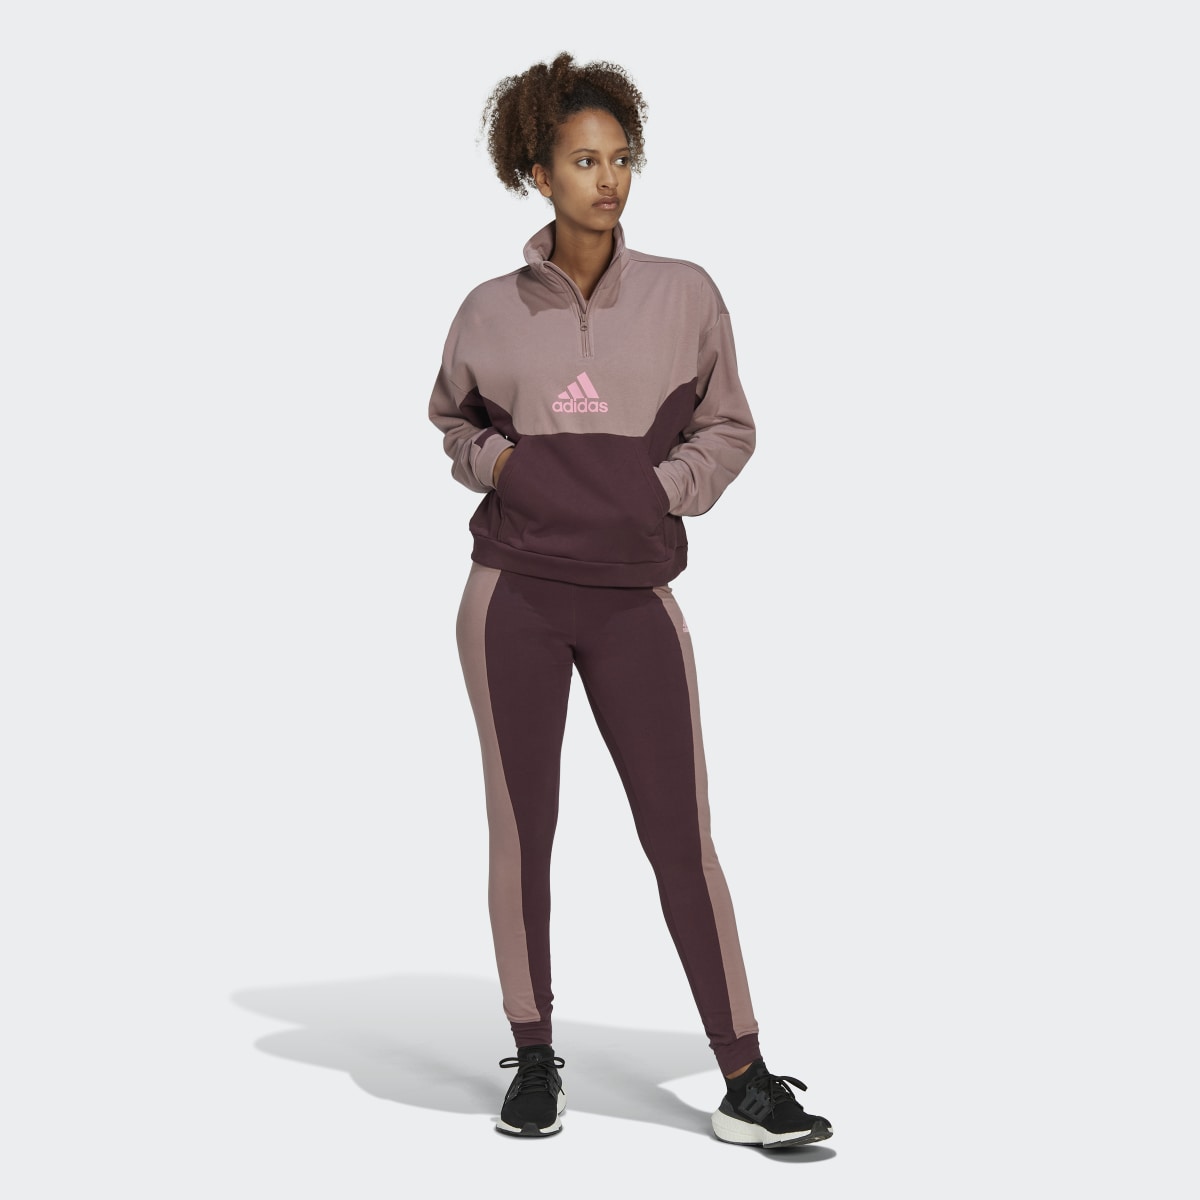 Adidas Half-Zip and Tights Track Suit. 4